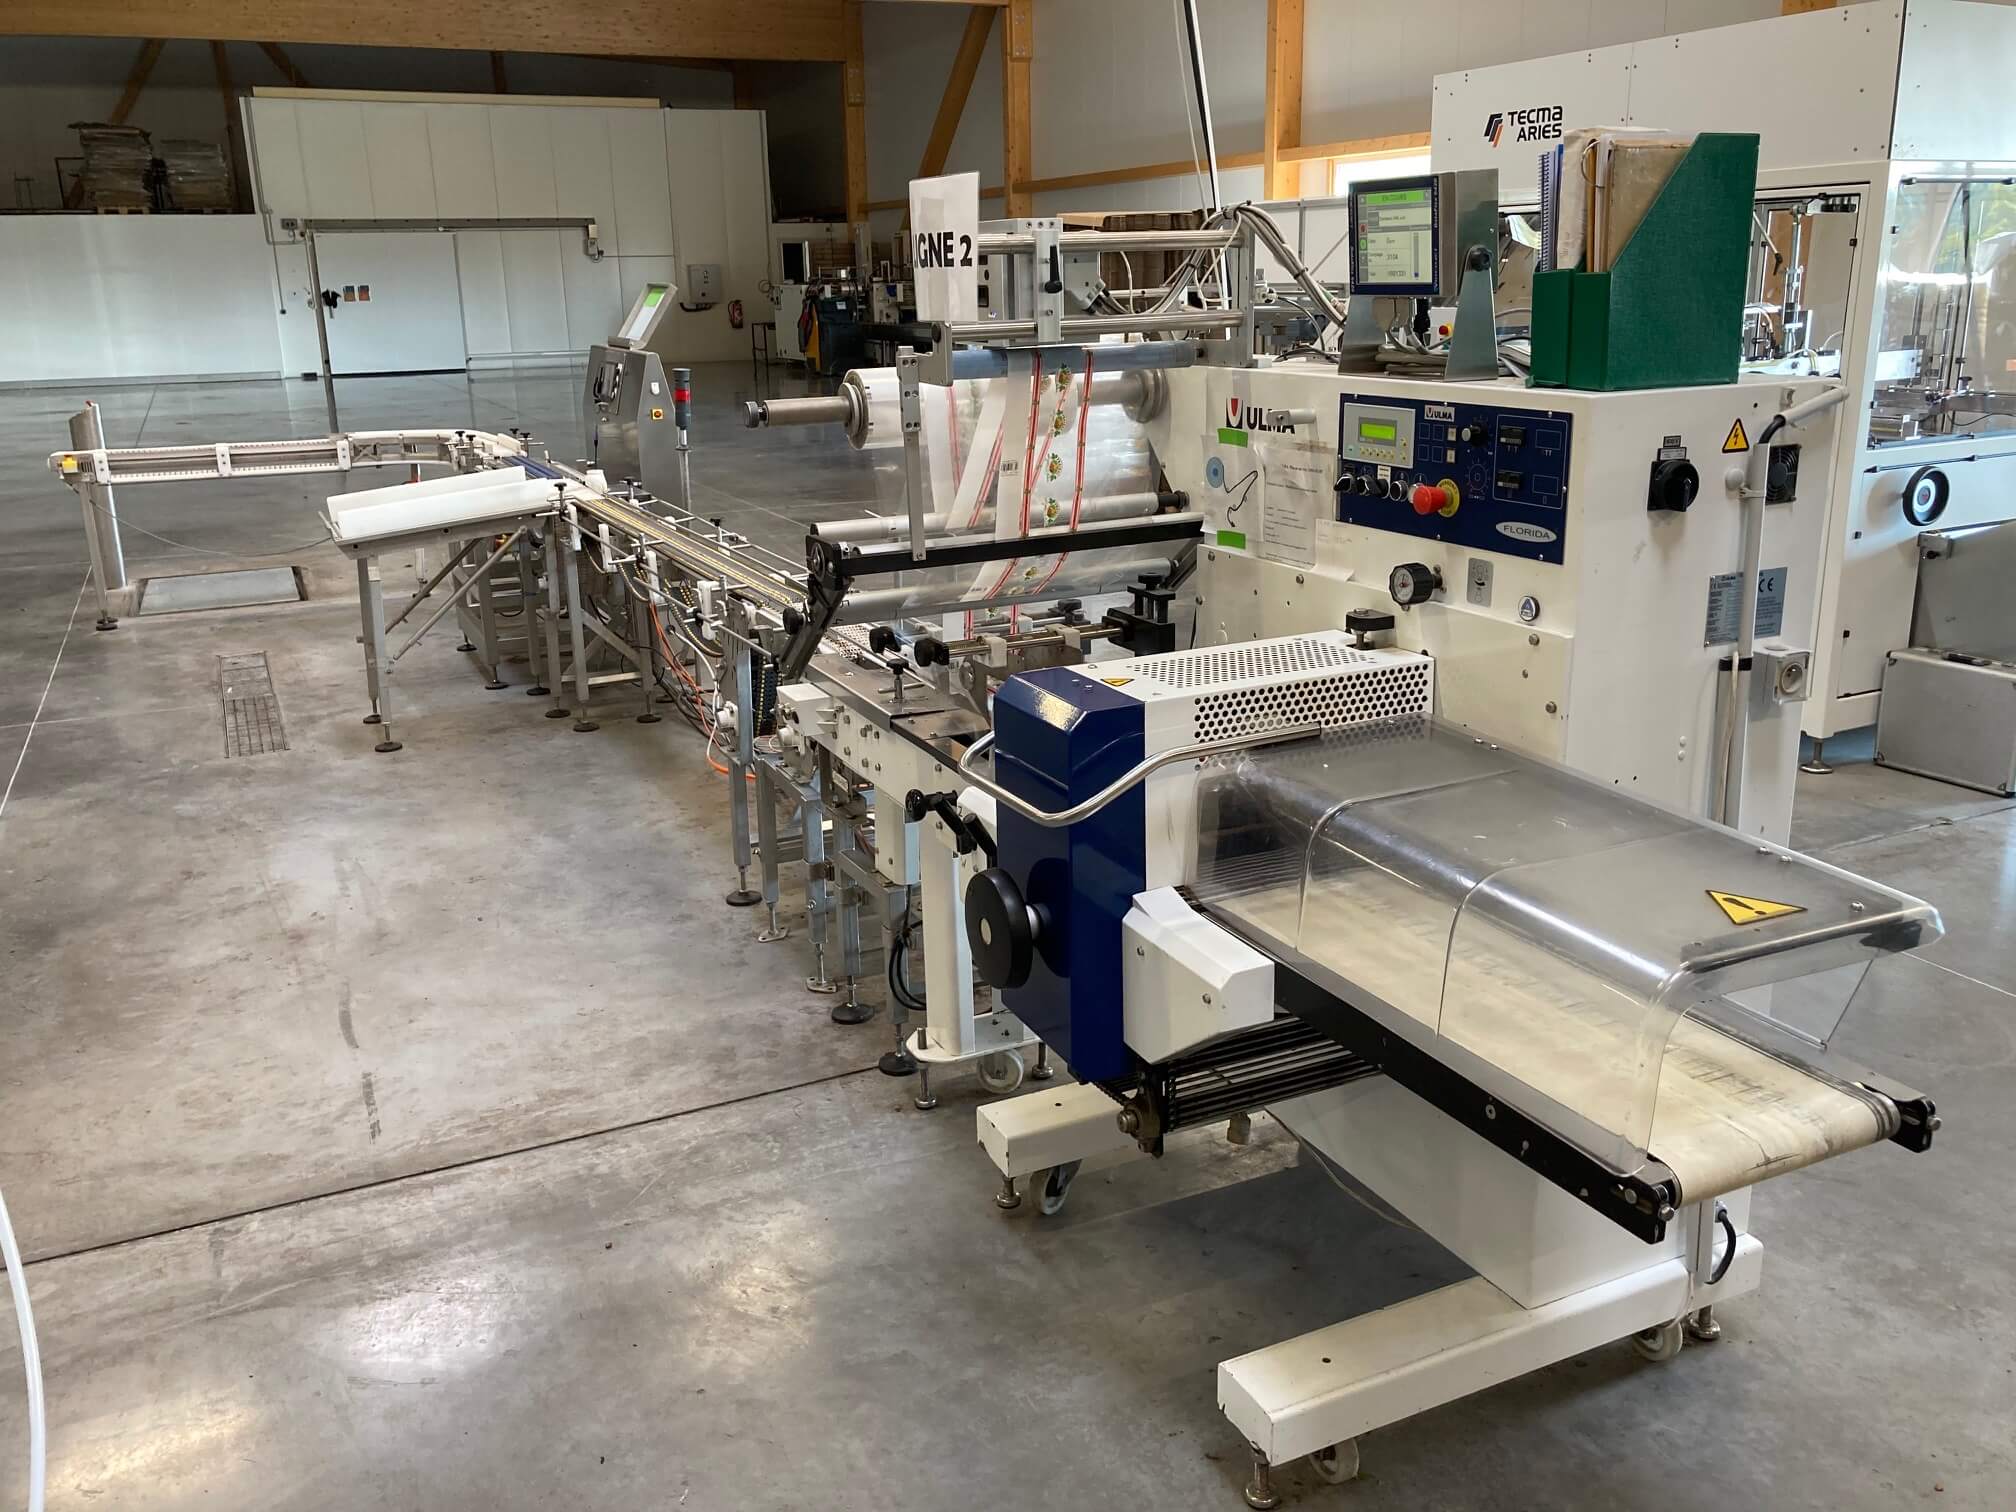 ➤ Used Bagging Machine for sale on  - many